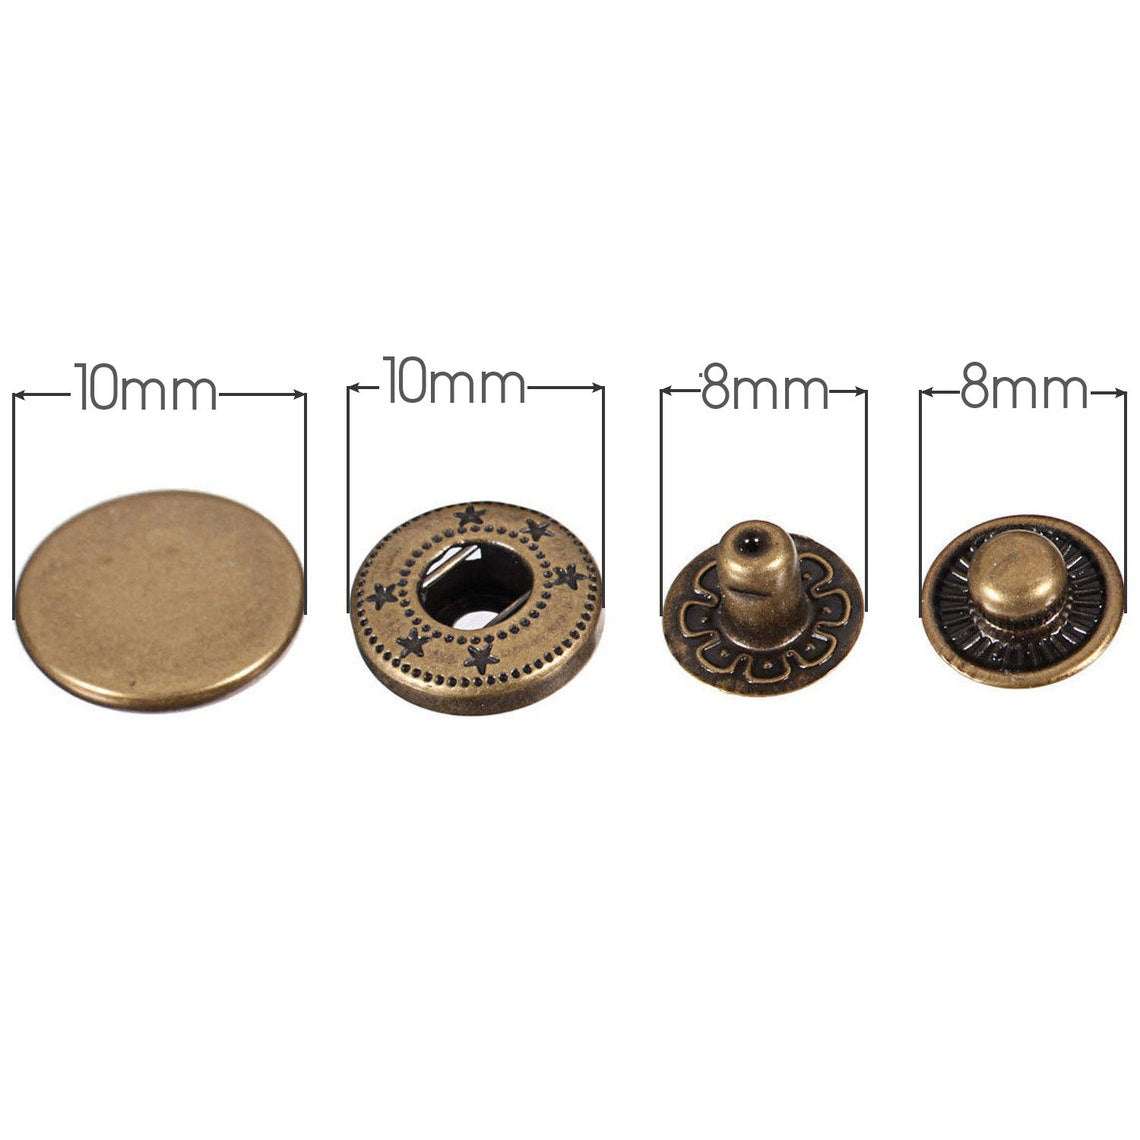 10mm VT2 Studs. (720 set / Stainless Material)